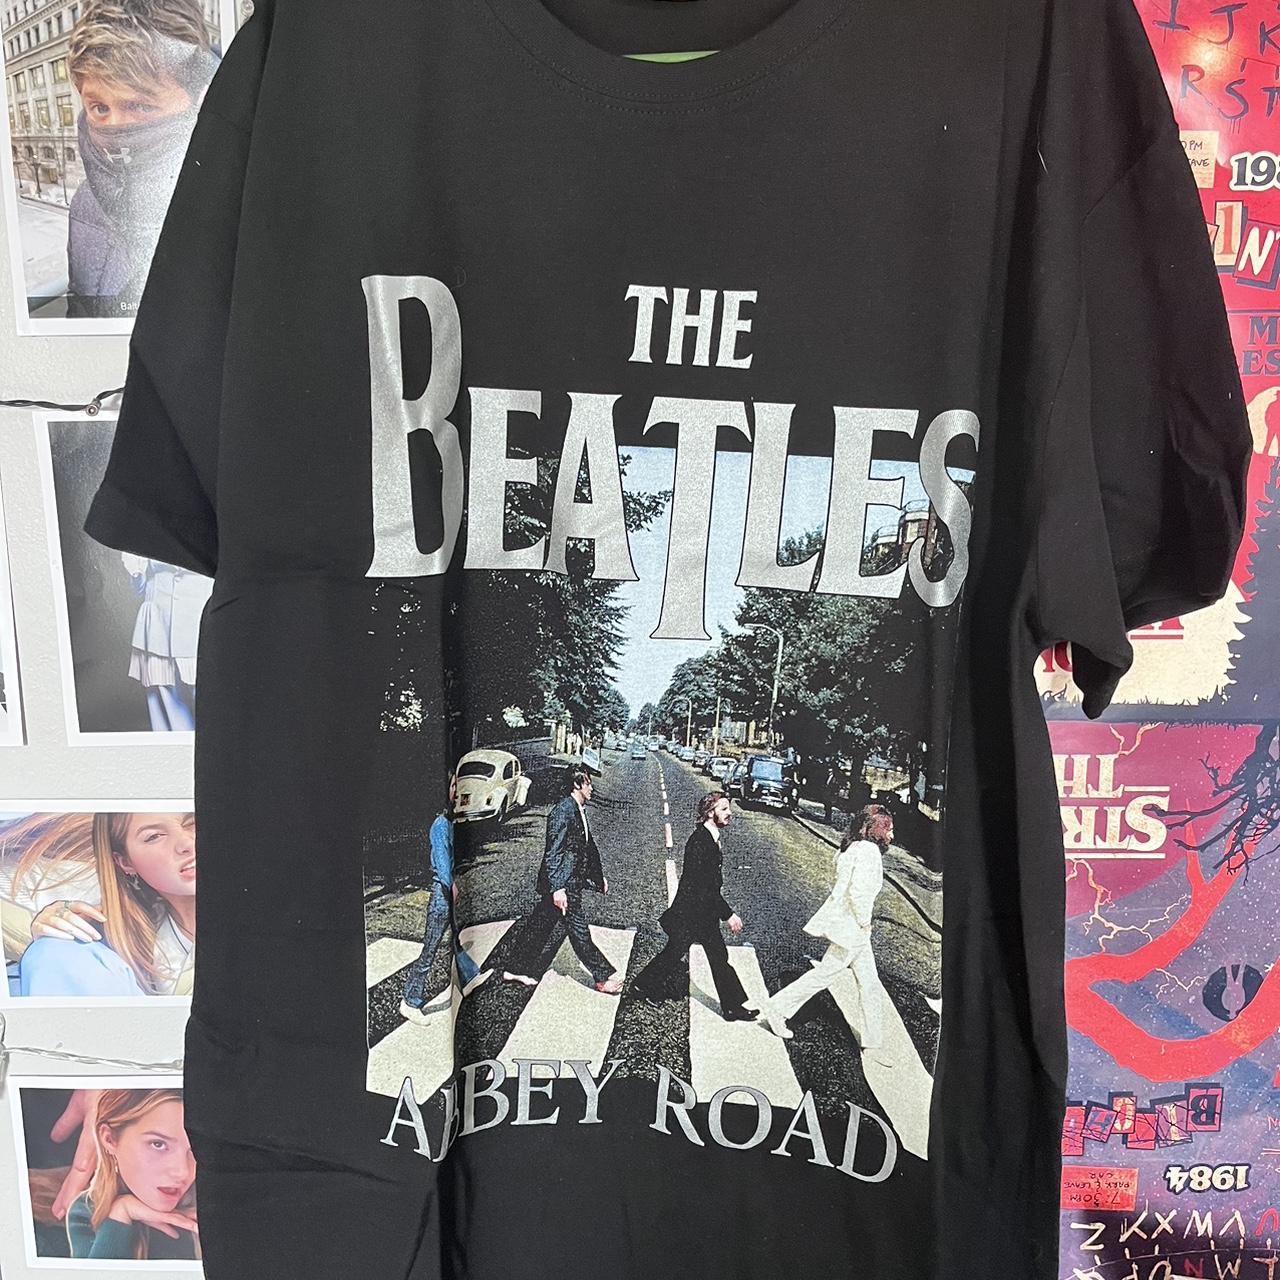 The Beatles’ Abbey Road t-shirt. Never worn before.... - Depop